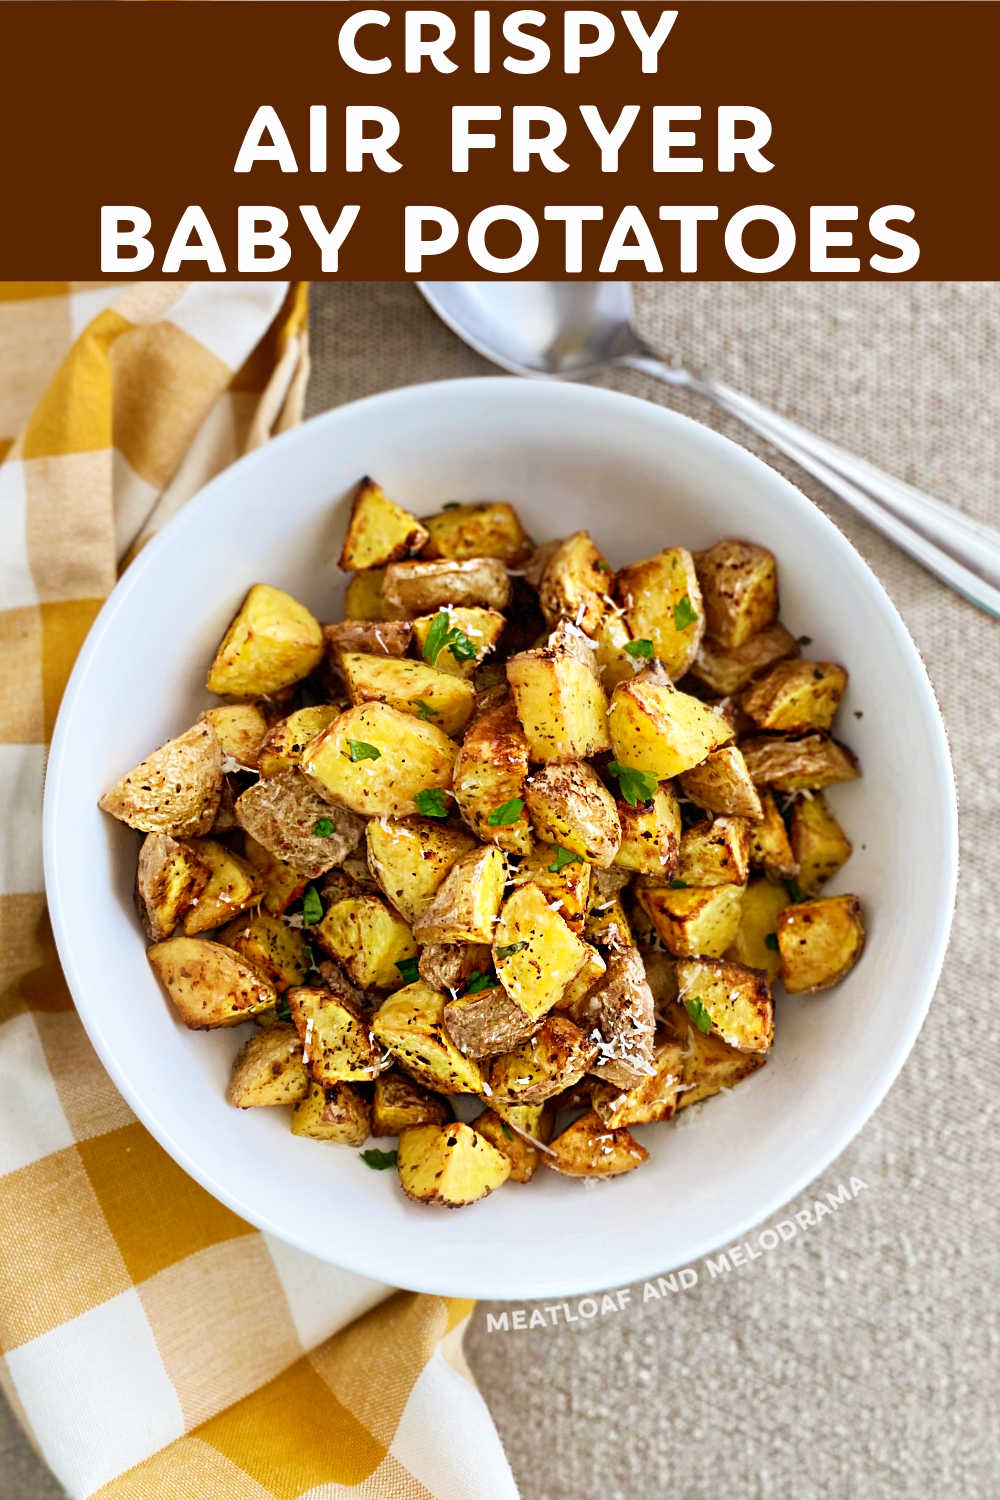 Crispy Air Fryer Baby Potatoes are the perfect easy side dish. Made with simple ingredients, these little potatoes are ready in minutes! Your whole family will love this easy air fryer recipe, and it goes with almost any main dish. via @meamel